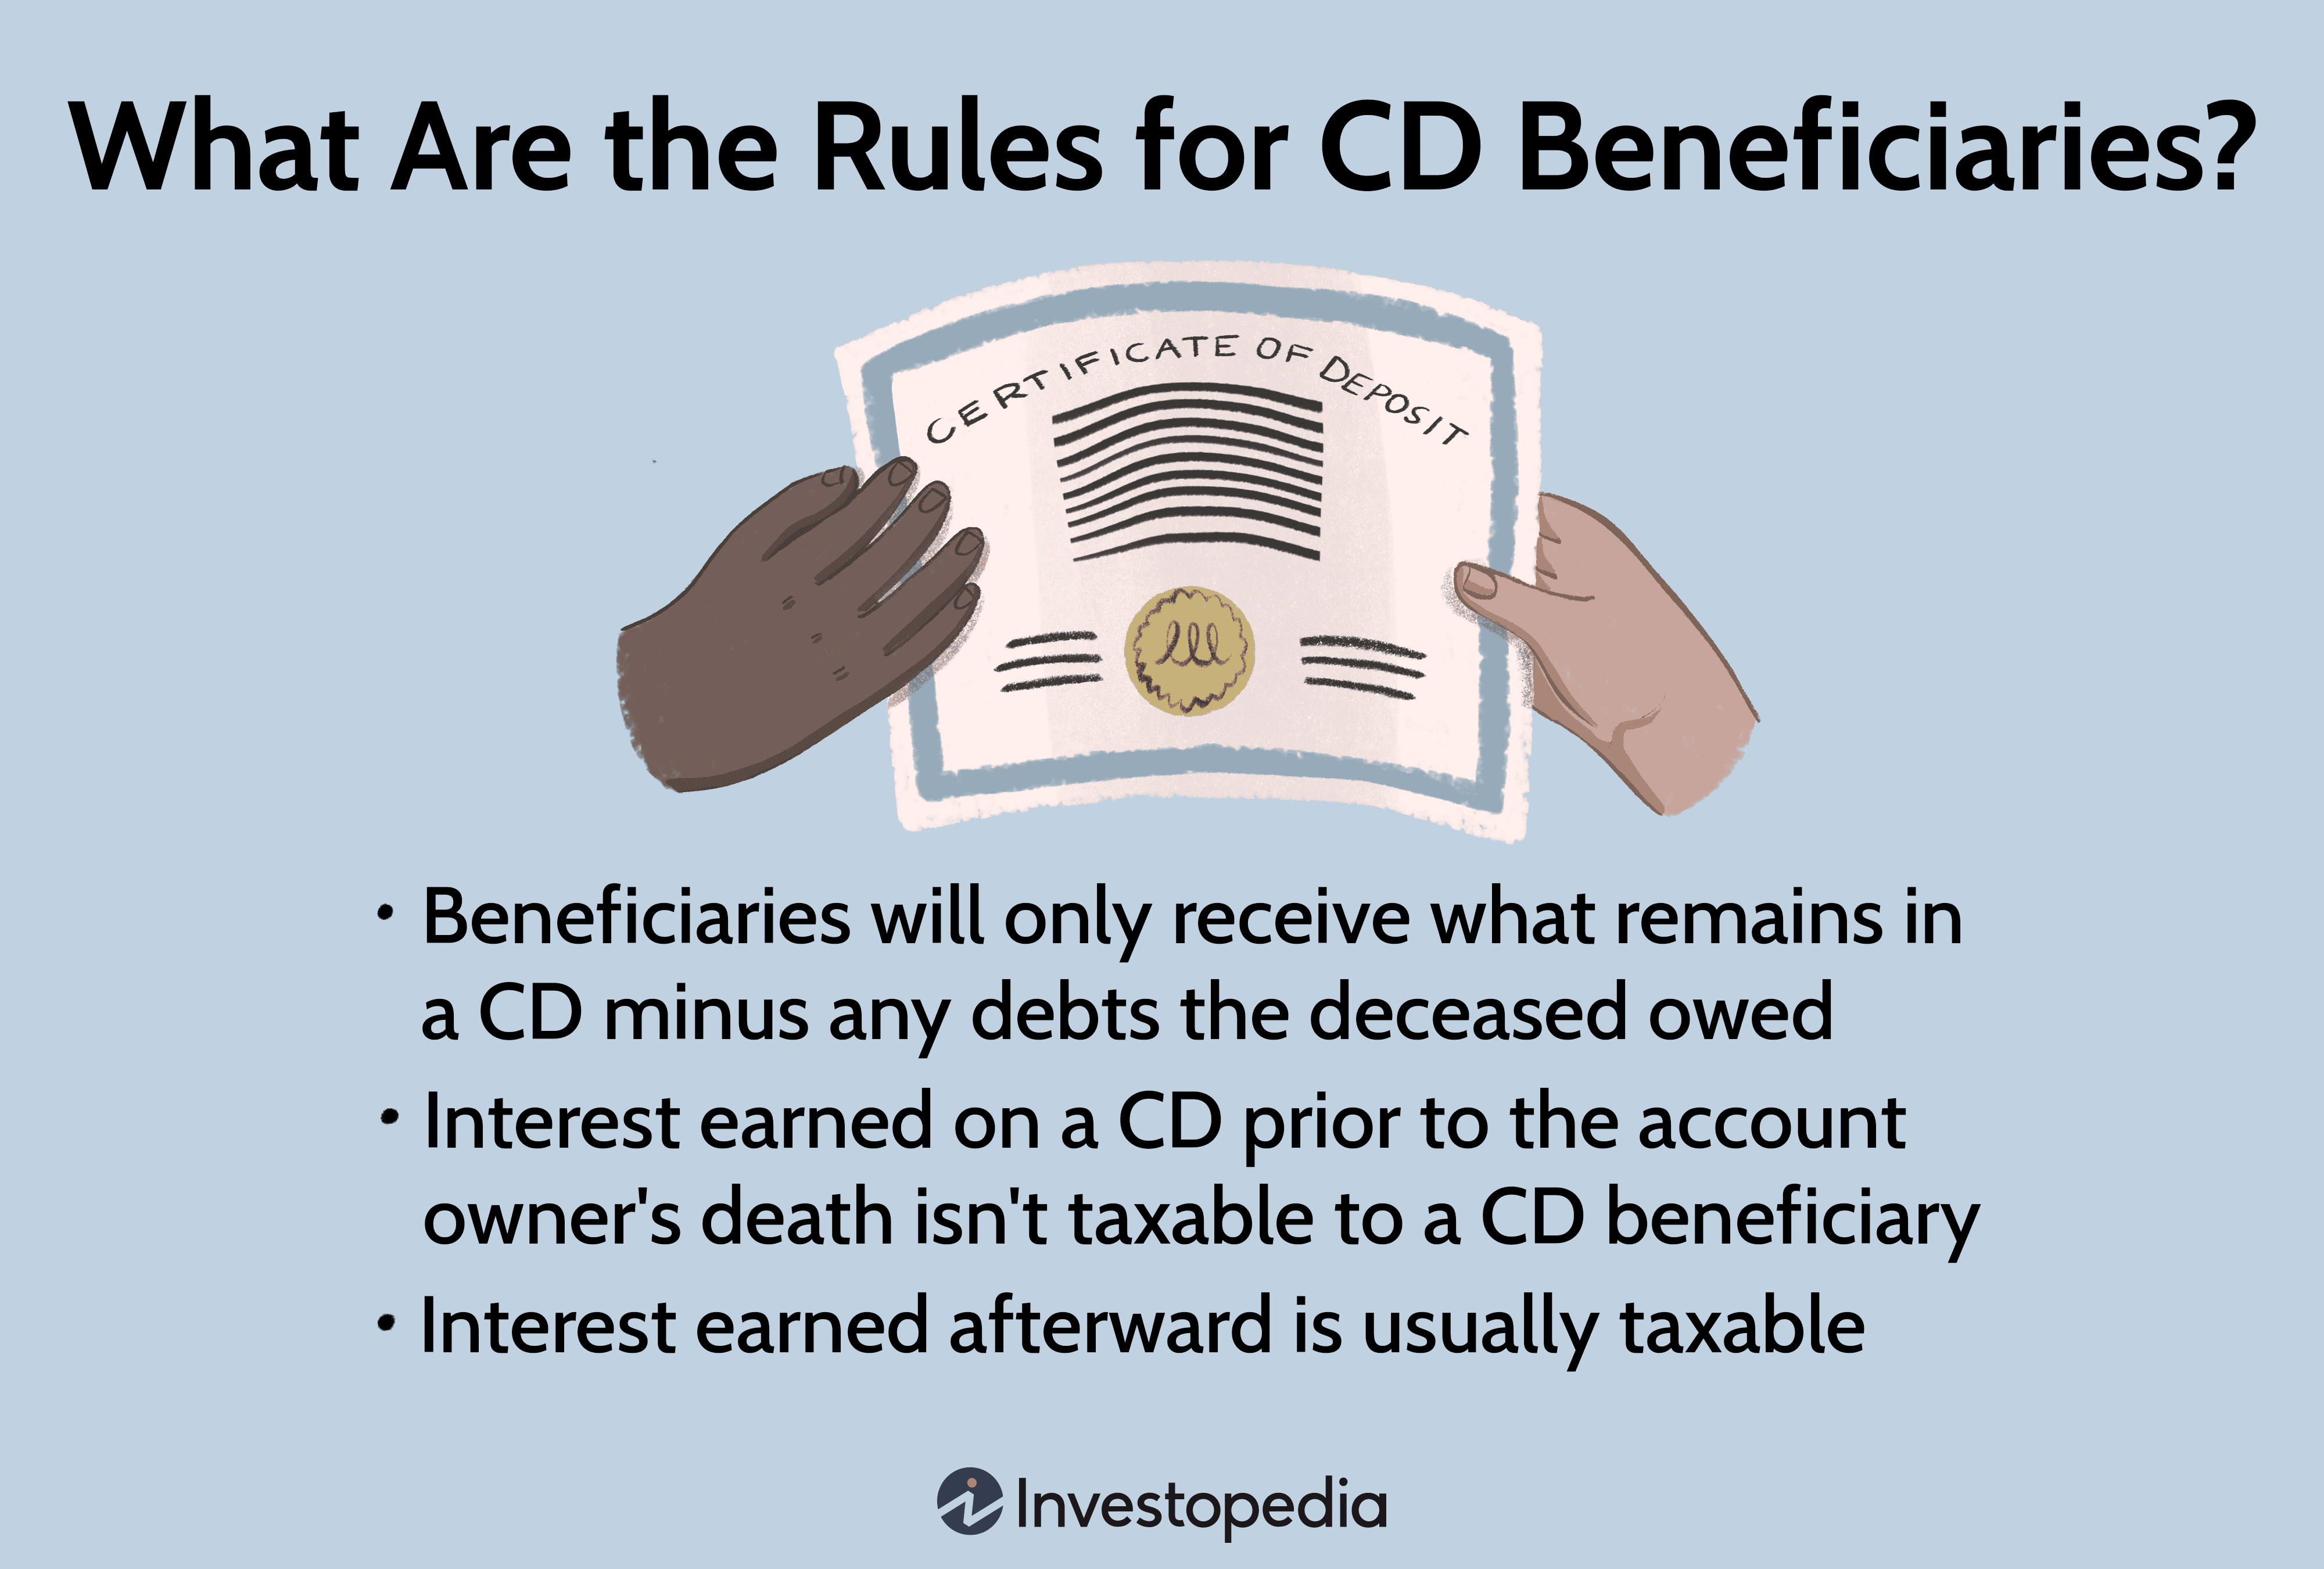 What Are the Rules for CD Beneficiaries?